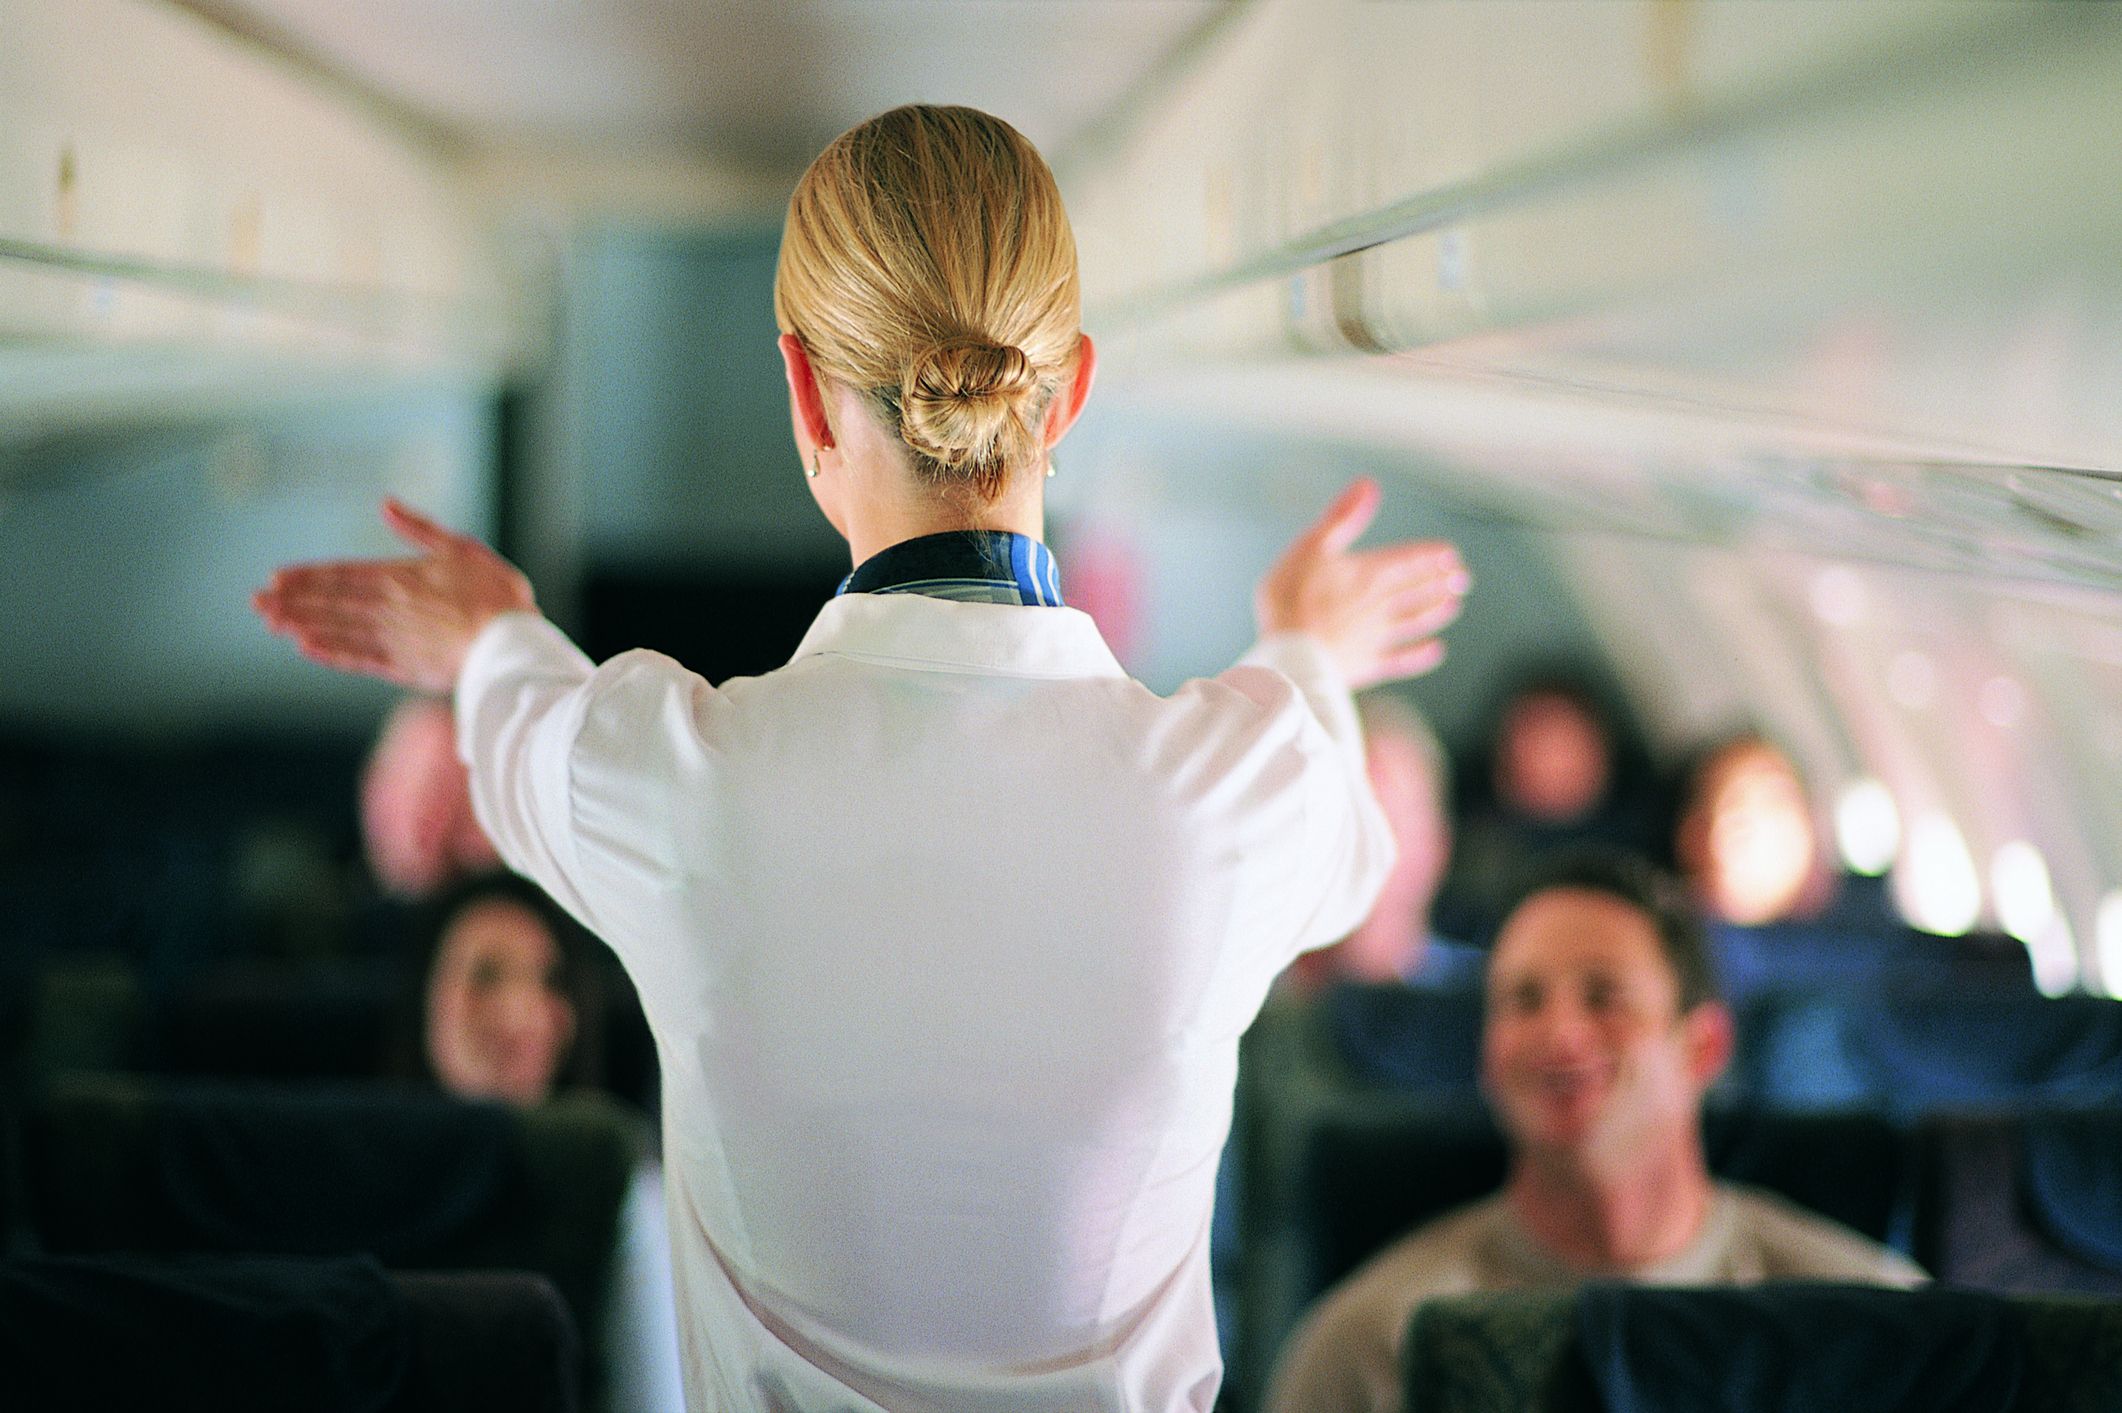 Air stewardesses 'aren't allowed to gain weight', one hostess reveals